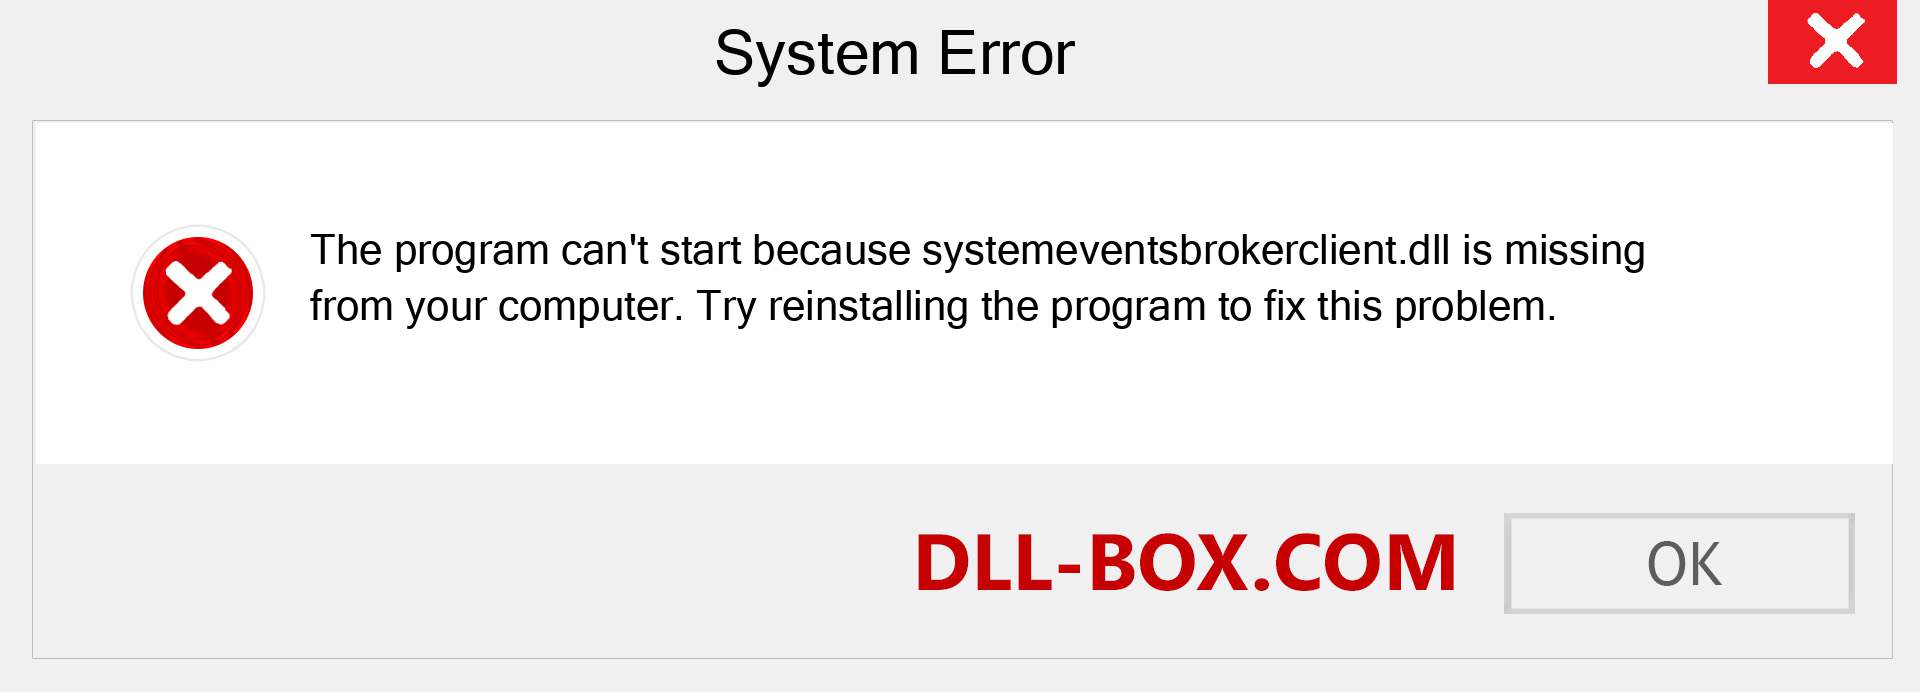  systemeventsbrokerclient.dll file is missing?. Download for Windows 7, 8, 10 - Fix  systemeventsbrokerclient dll Missing Error on Windows, photos, images